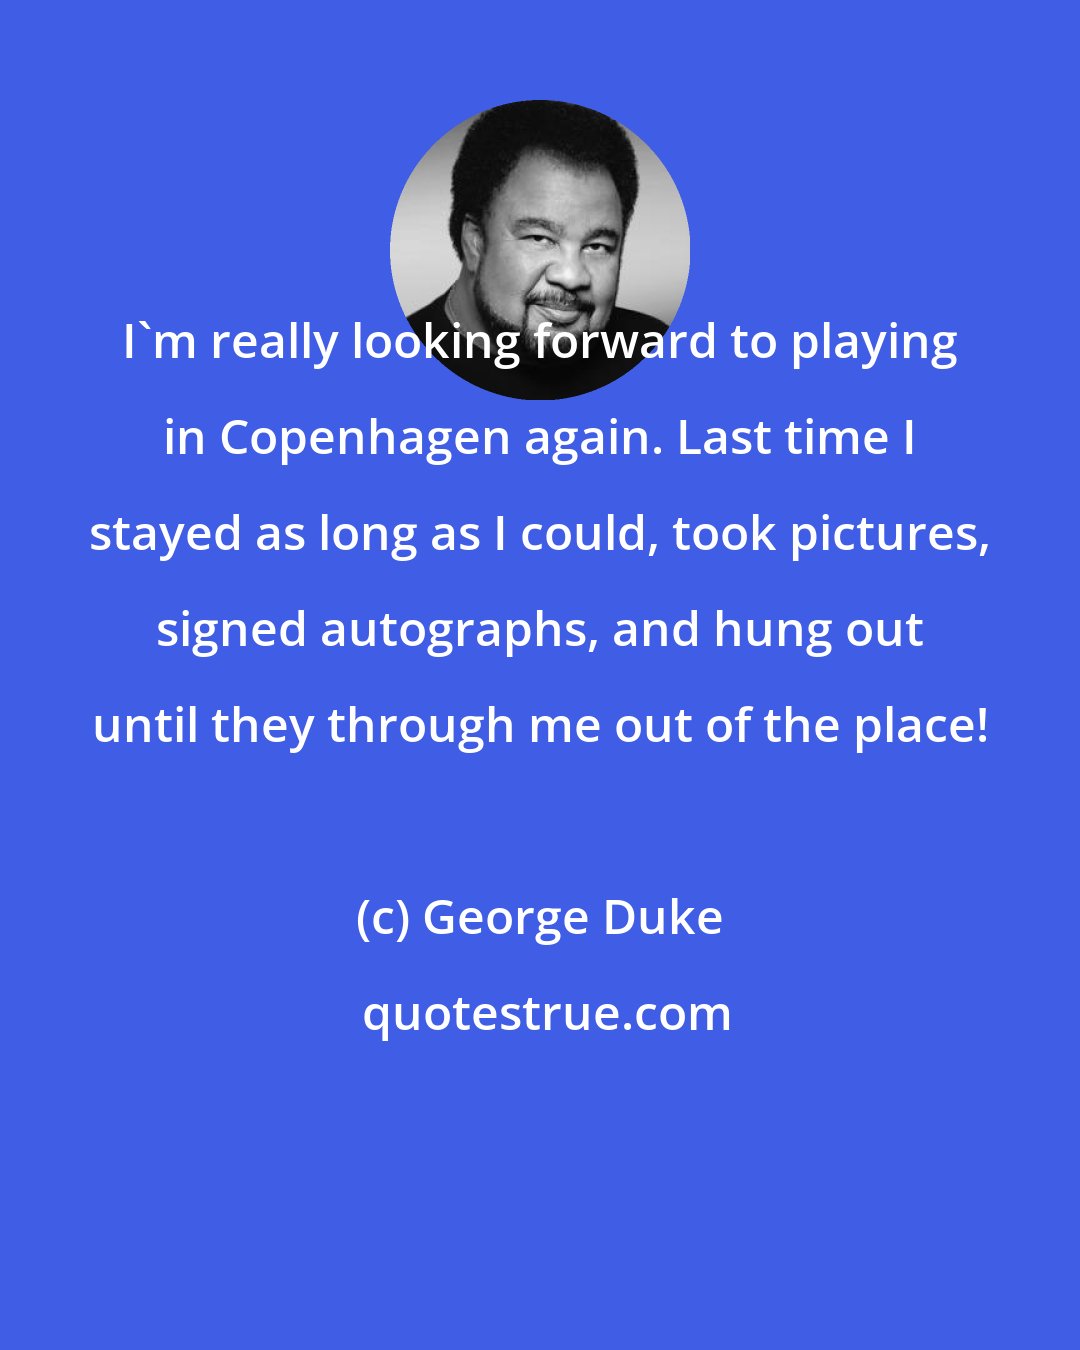 George Duke: I'm really looking forward to playing in Copenhagen again. Last time I stayed as long as I could, took pictures, signed autographs, and hung out until they through me out of the place!